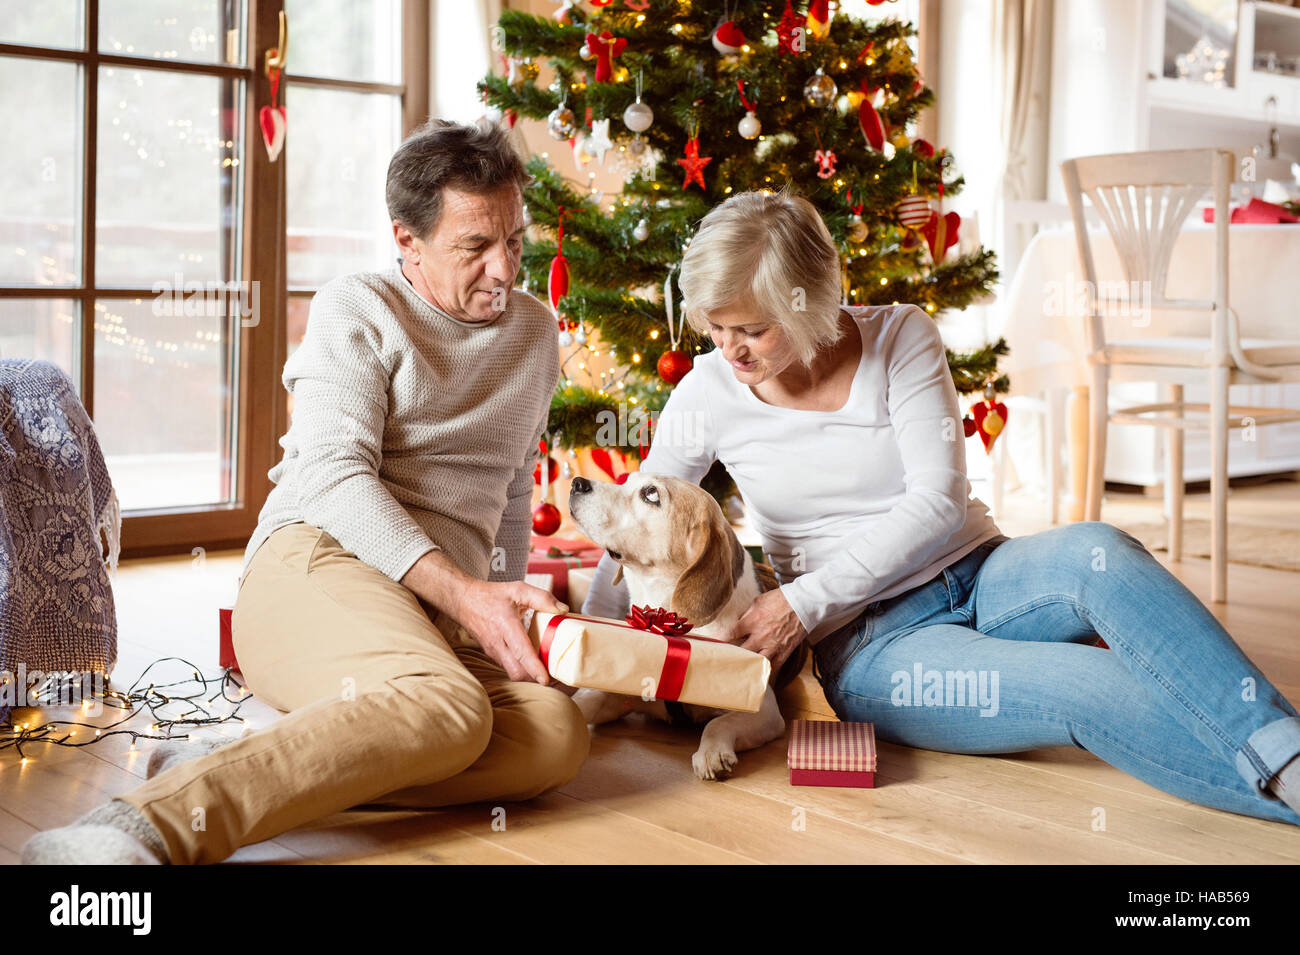 Senior couple in front of Christmas tree with presents. Stock Photo